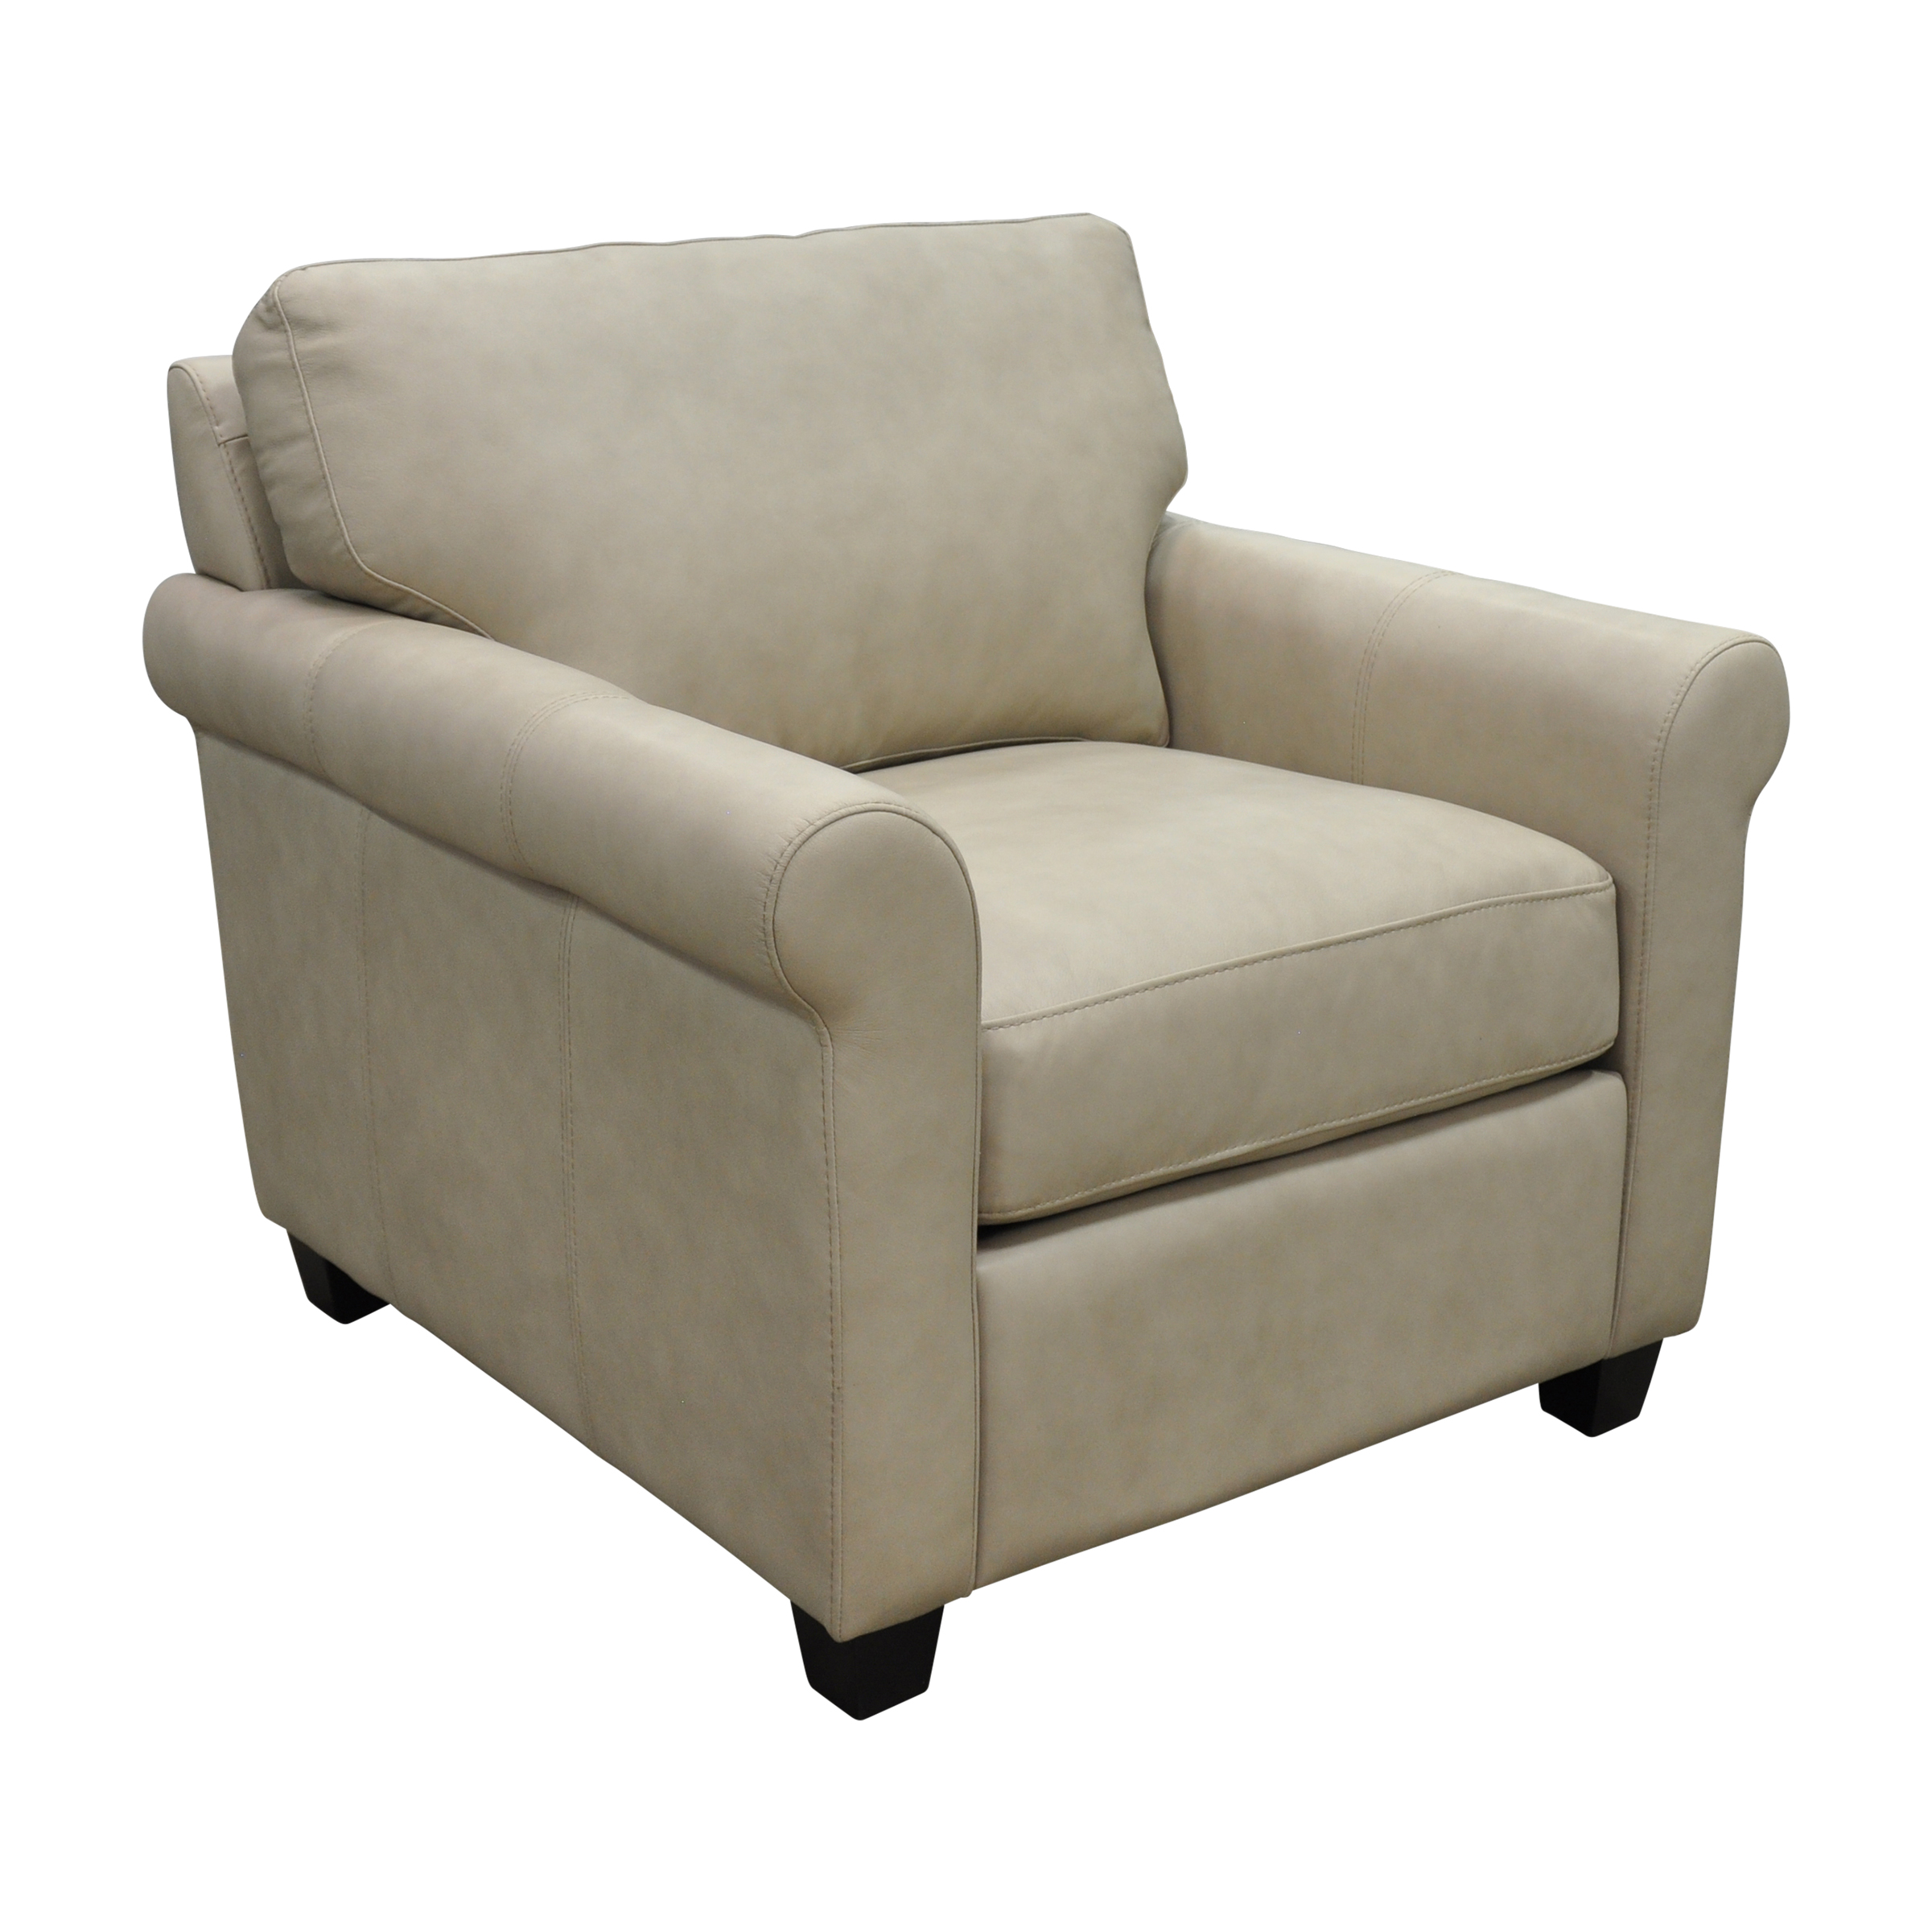 Stationary Solutions 201 Accent Chair